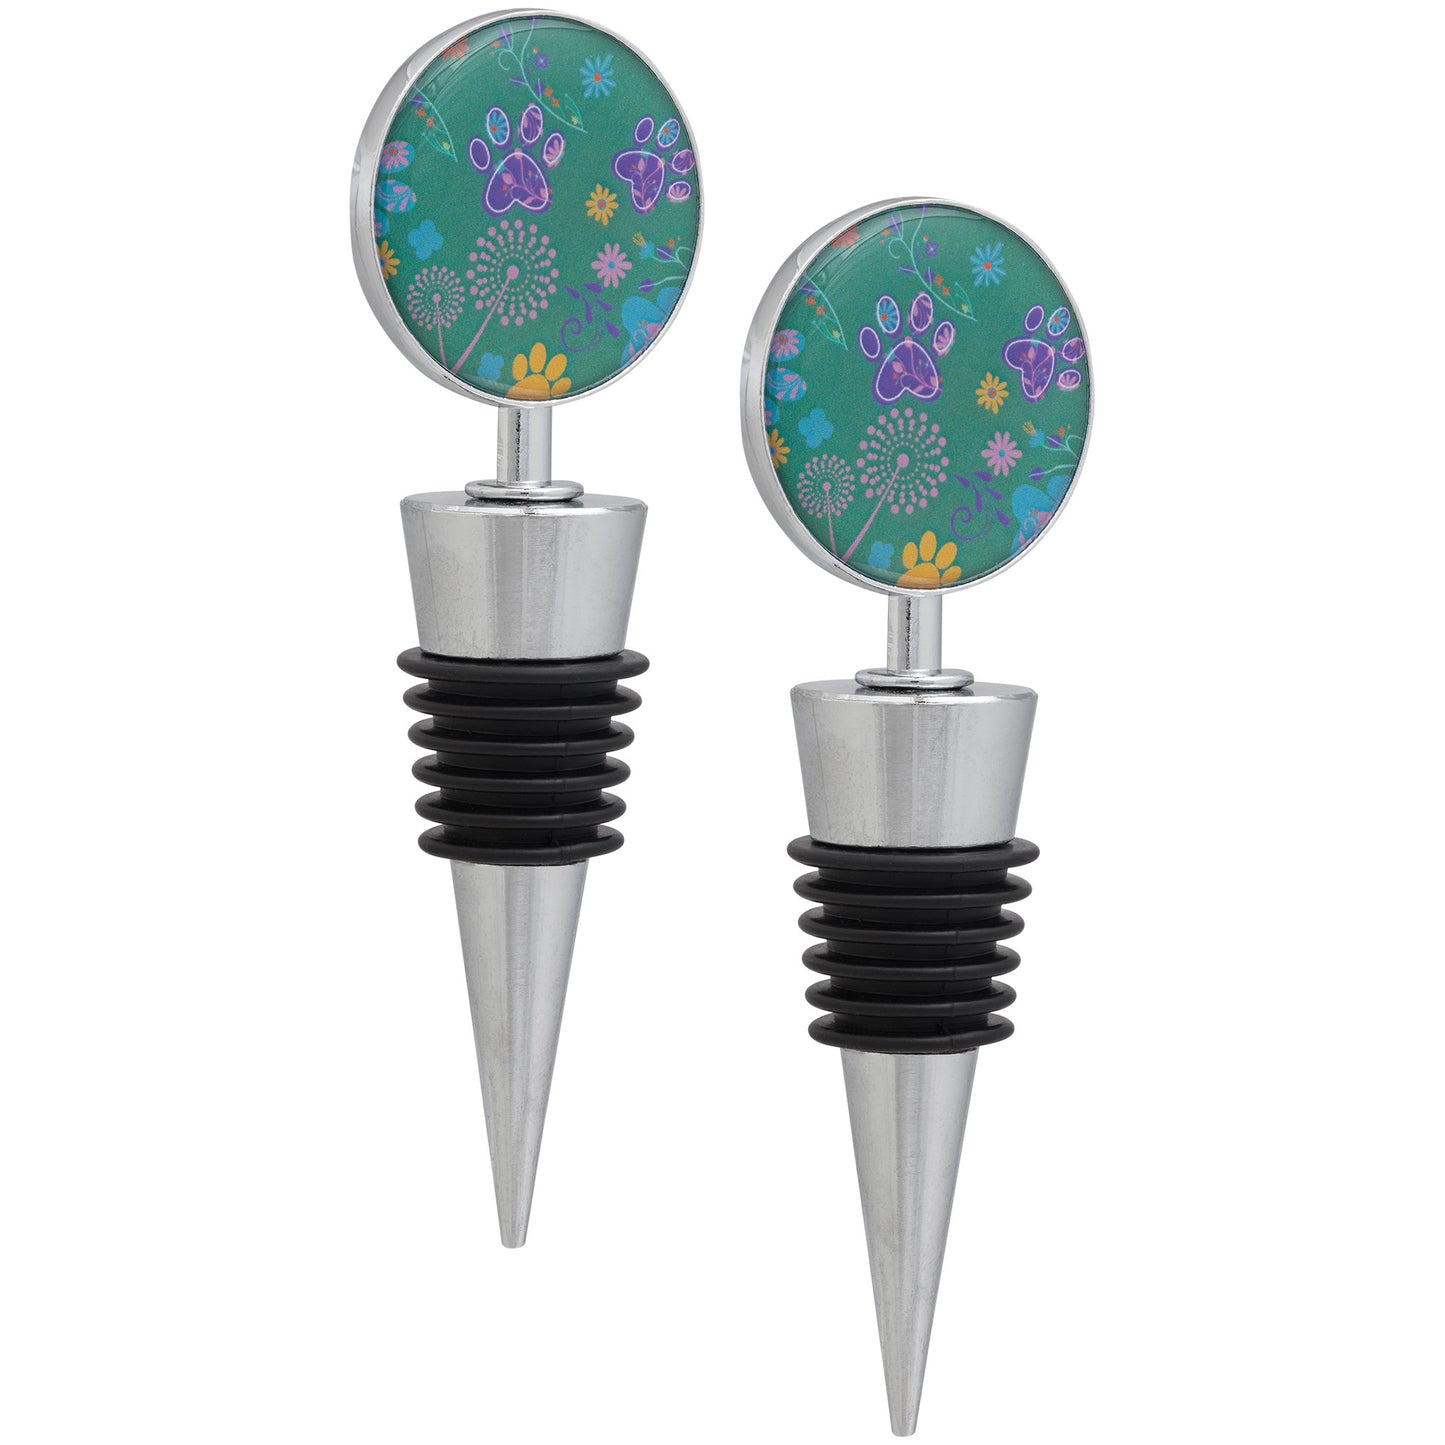 Fields of Flowers Paws Wine Stopper - Set of 2